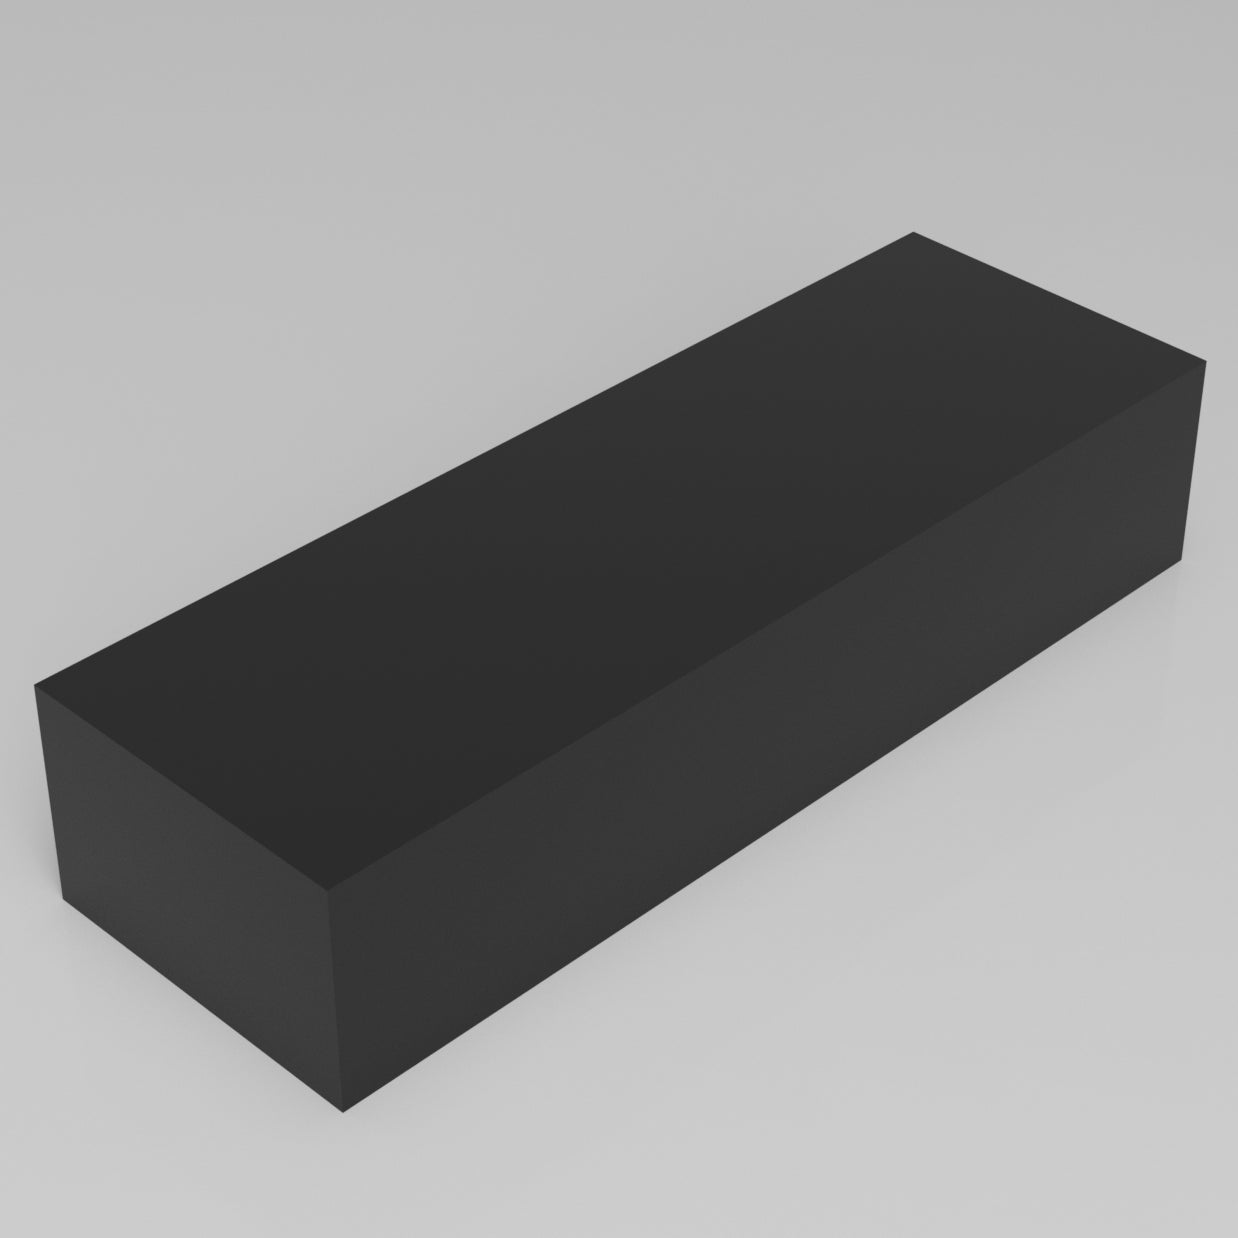 Machinable Wax Rectangular Block Front View 5 Inch by 8 Inch by 24 Inch